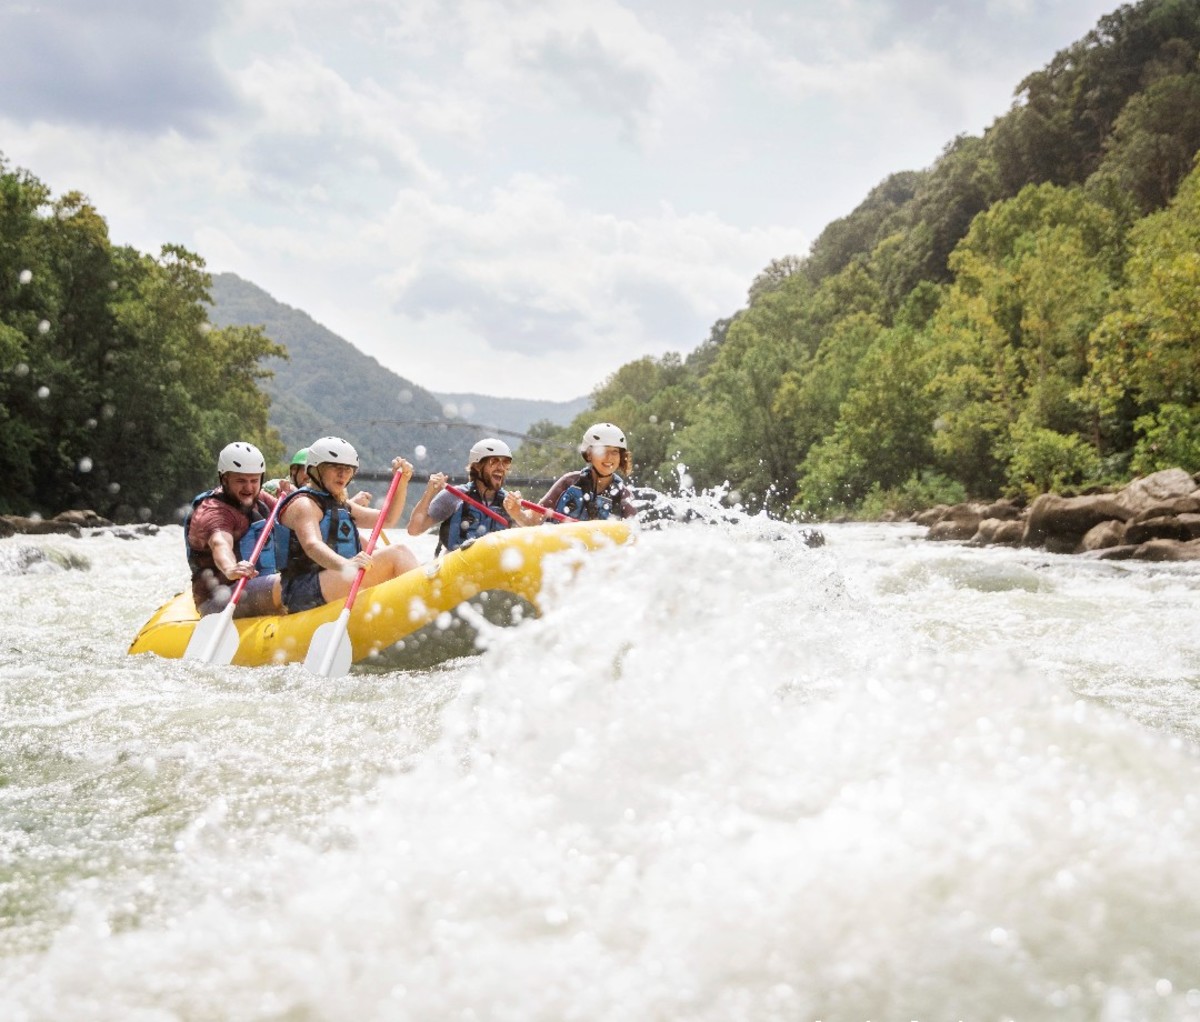 A raft with paddlers goes through whitewater in West Virginia's New River Gorge.